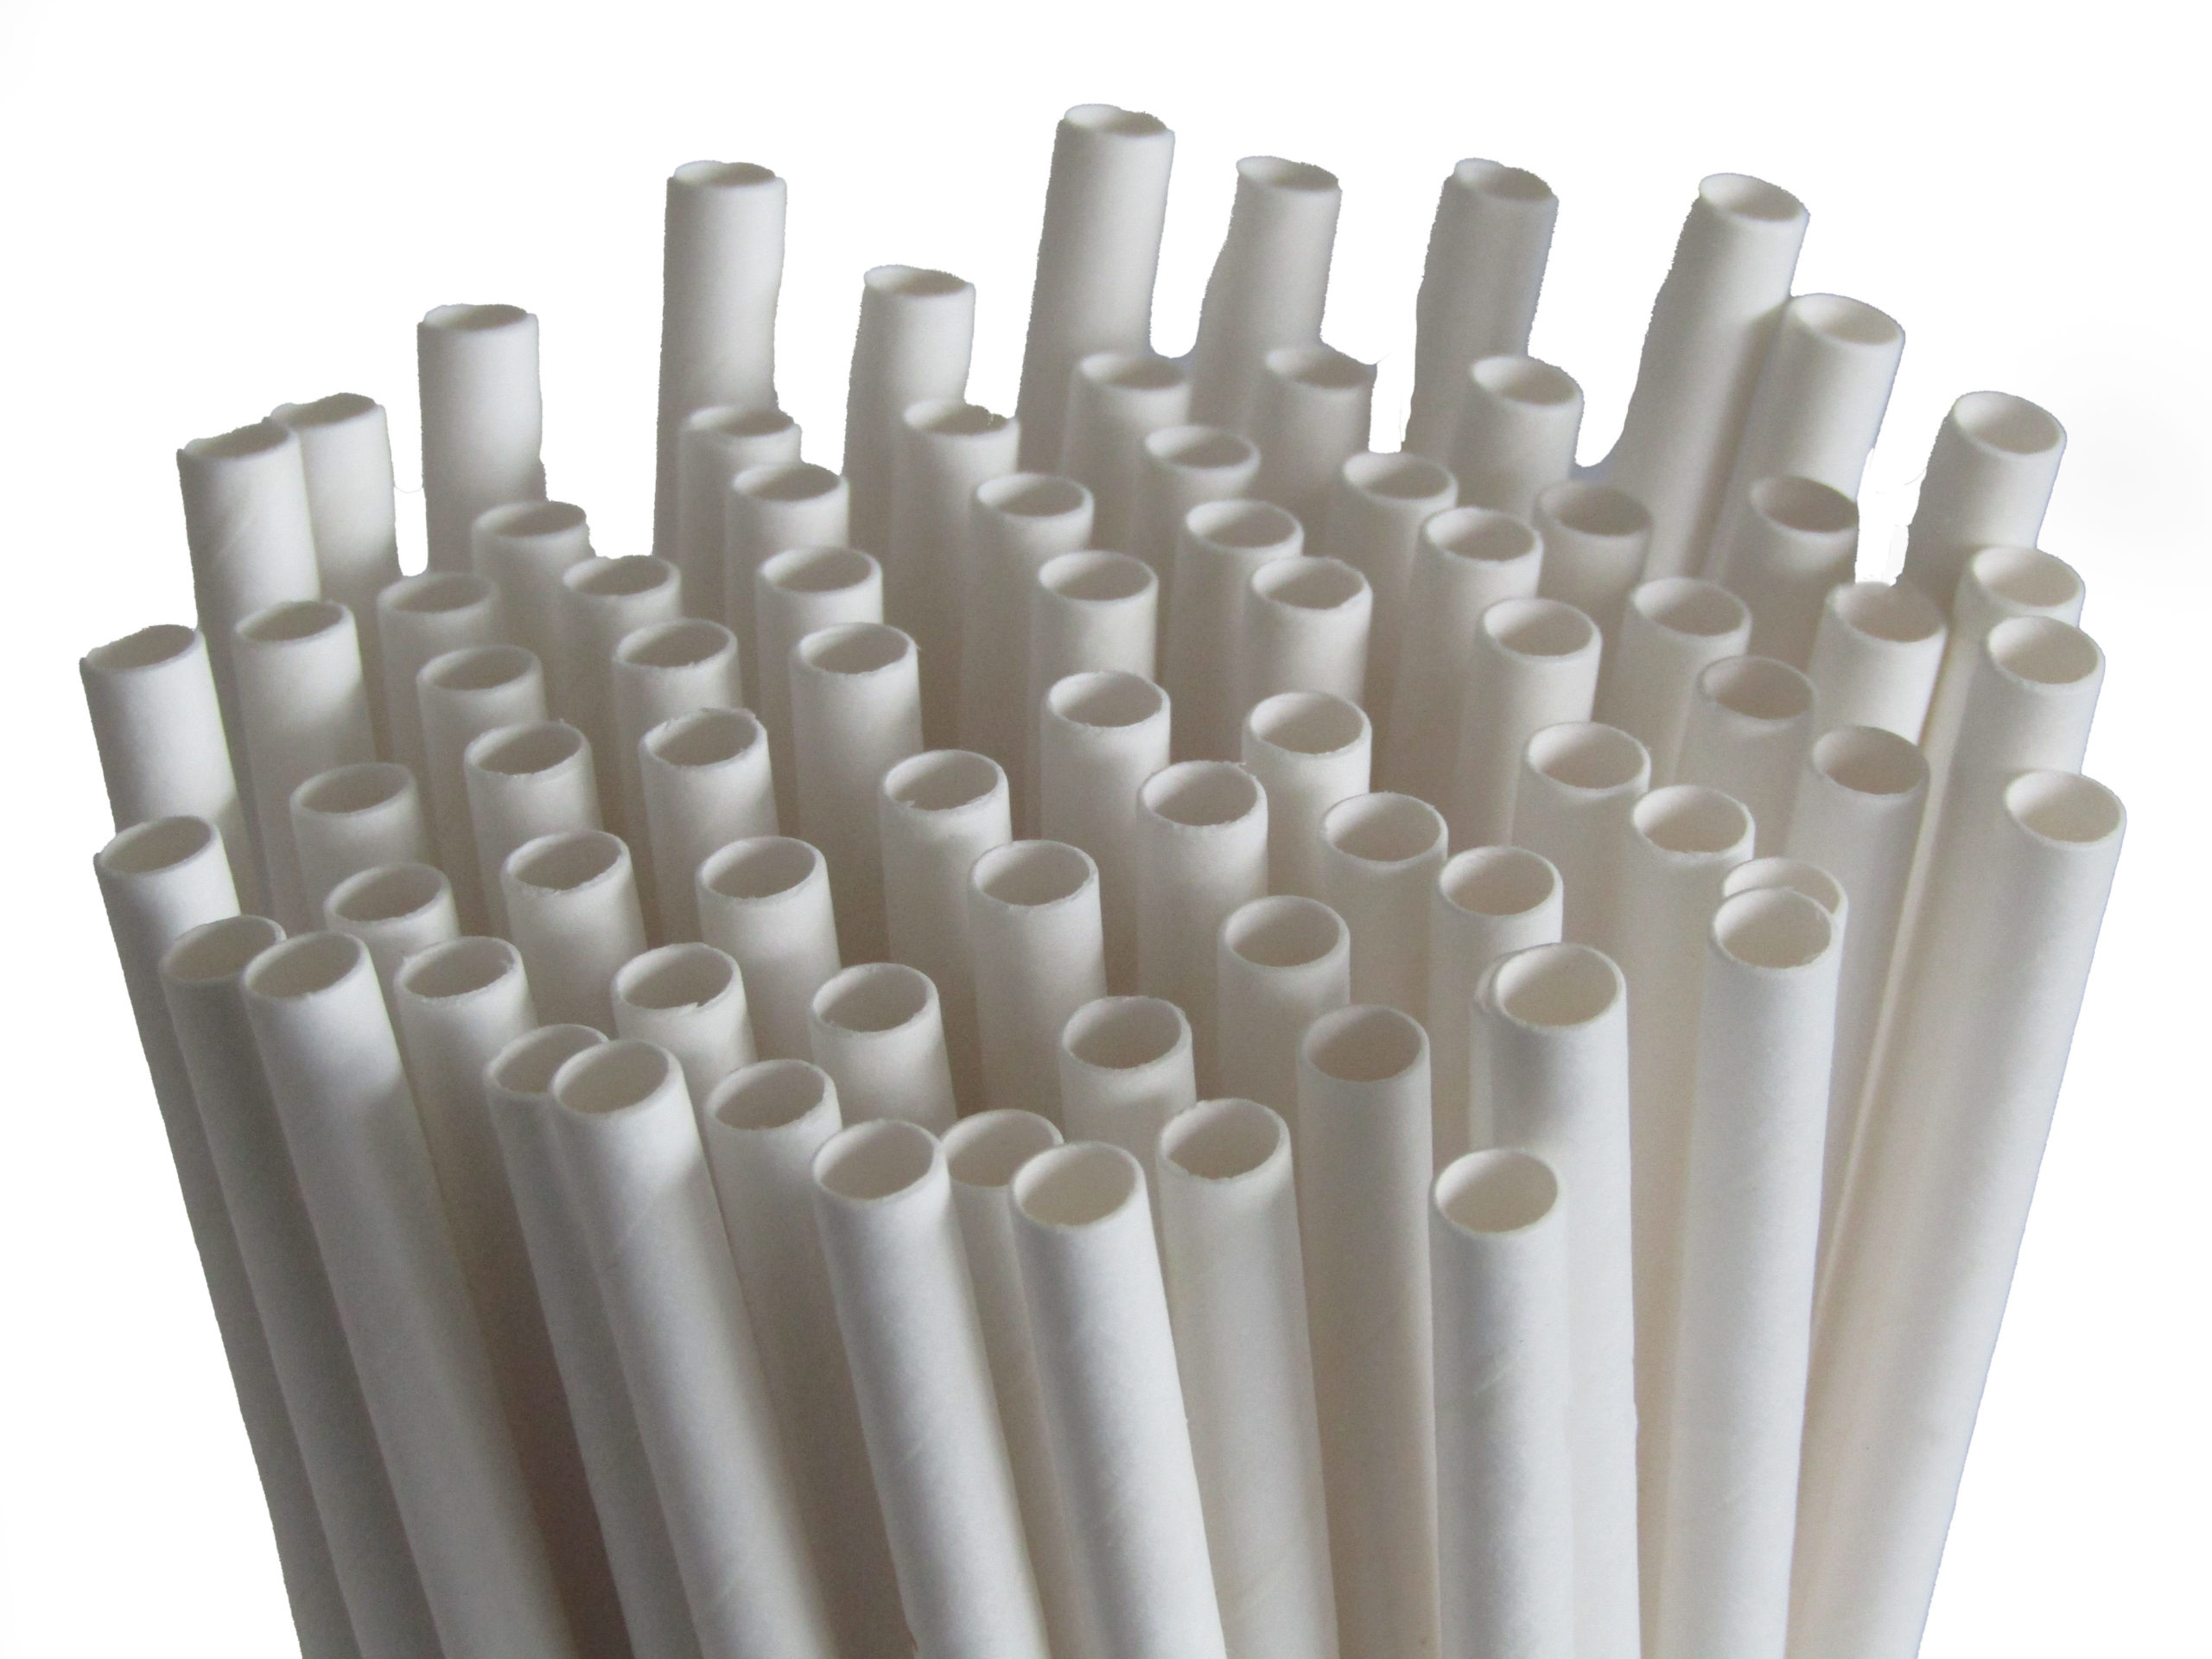 White 5.5" Paper Straws 250 Biodegradable & Recyclable Drinking Straws 